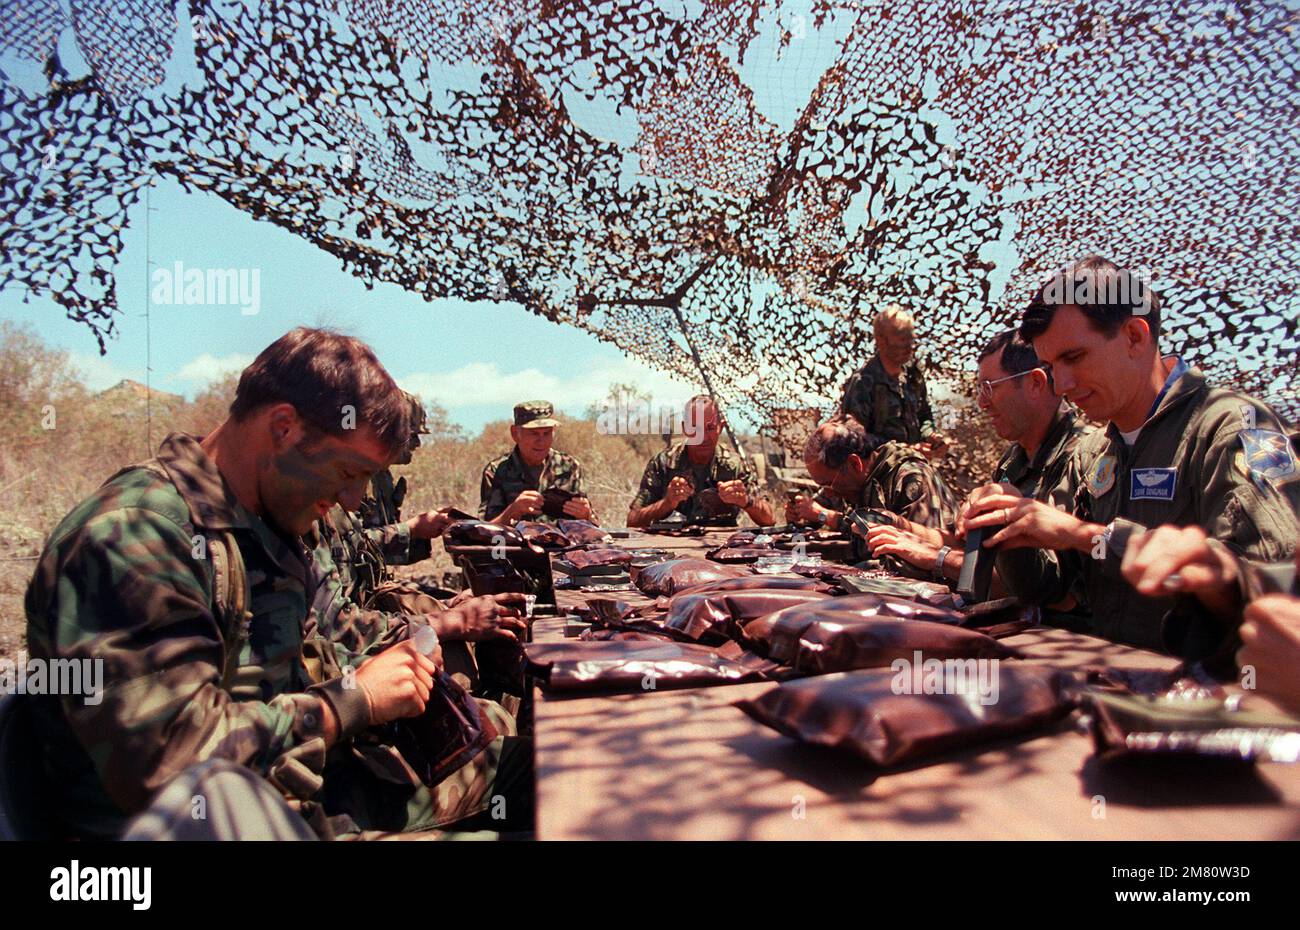 LT. GEN. James M. Lee (left center), Commander, WESTCOM, sits with MAJ. GEN. William H. Schneider, Commander, 25th Inf. Div., and members of the Combat Support Company, 1ST Bn., 35th Inf., 25th Inf. Div., as they dine on experimental MRE (Meal Ready-to-Eat) rations. Base: Pohakuloa Training Area State: Hawaii (HI) Country: United States Of America (USA) Stock Photo